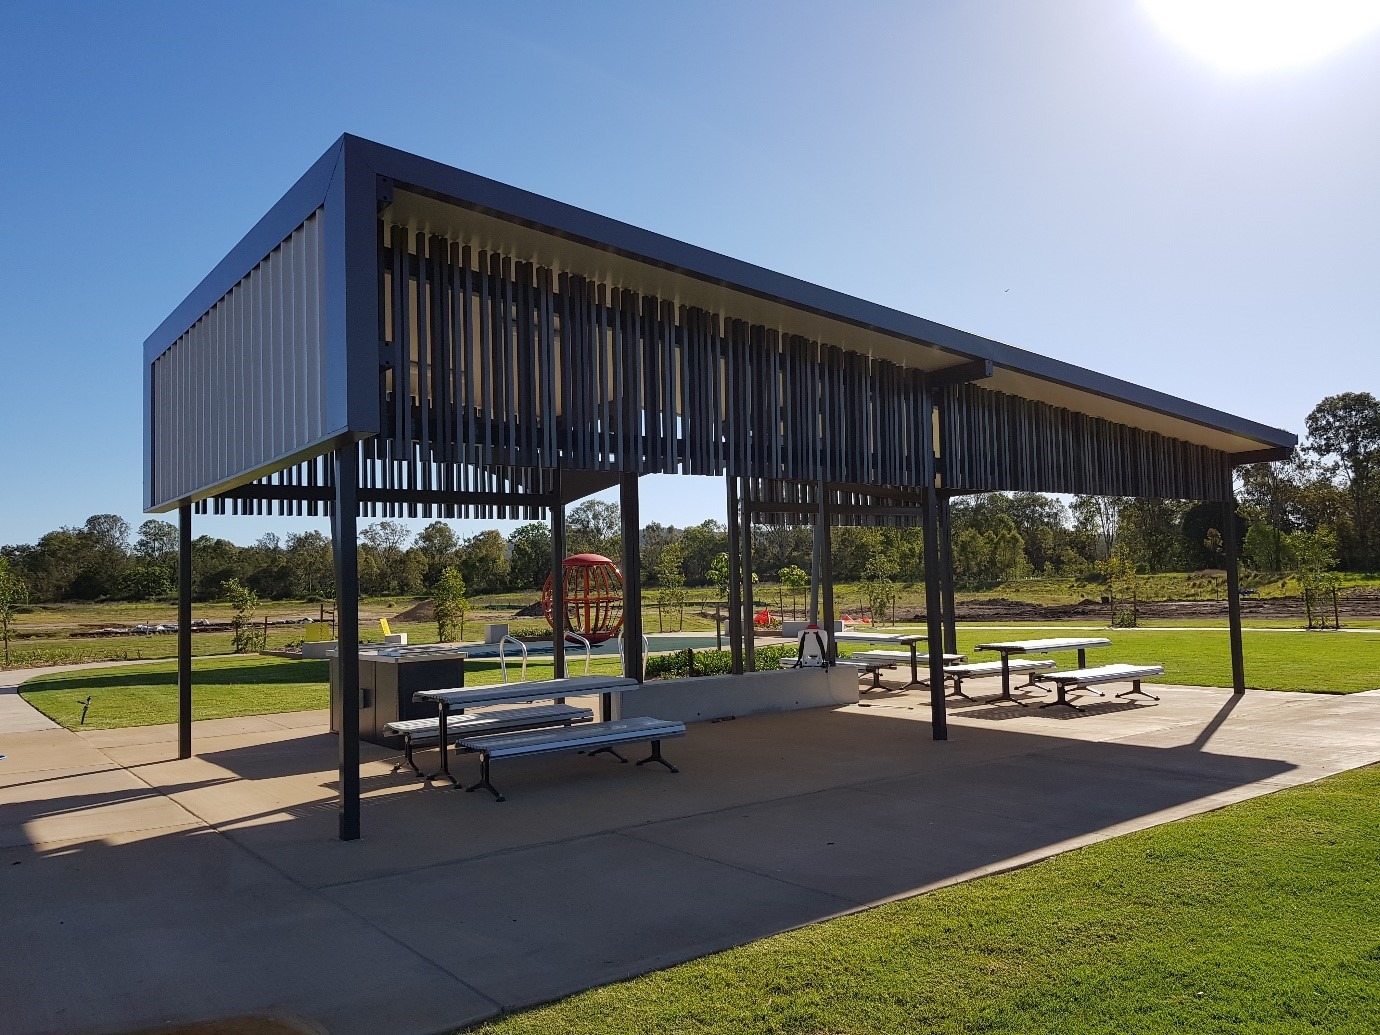 Custom shade structure installed for Ripley Sports Park by Versatile Structures